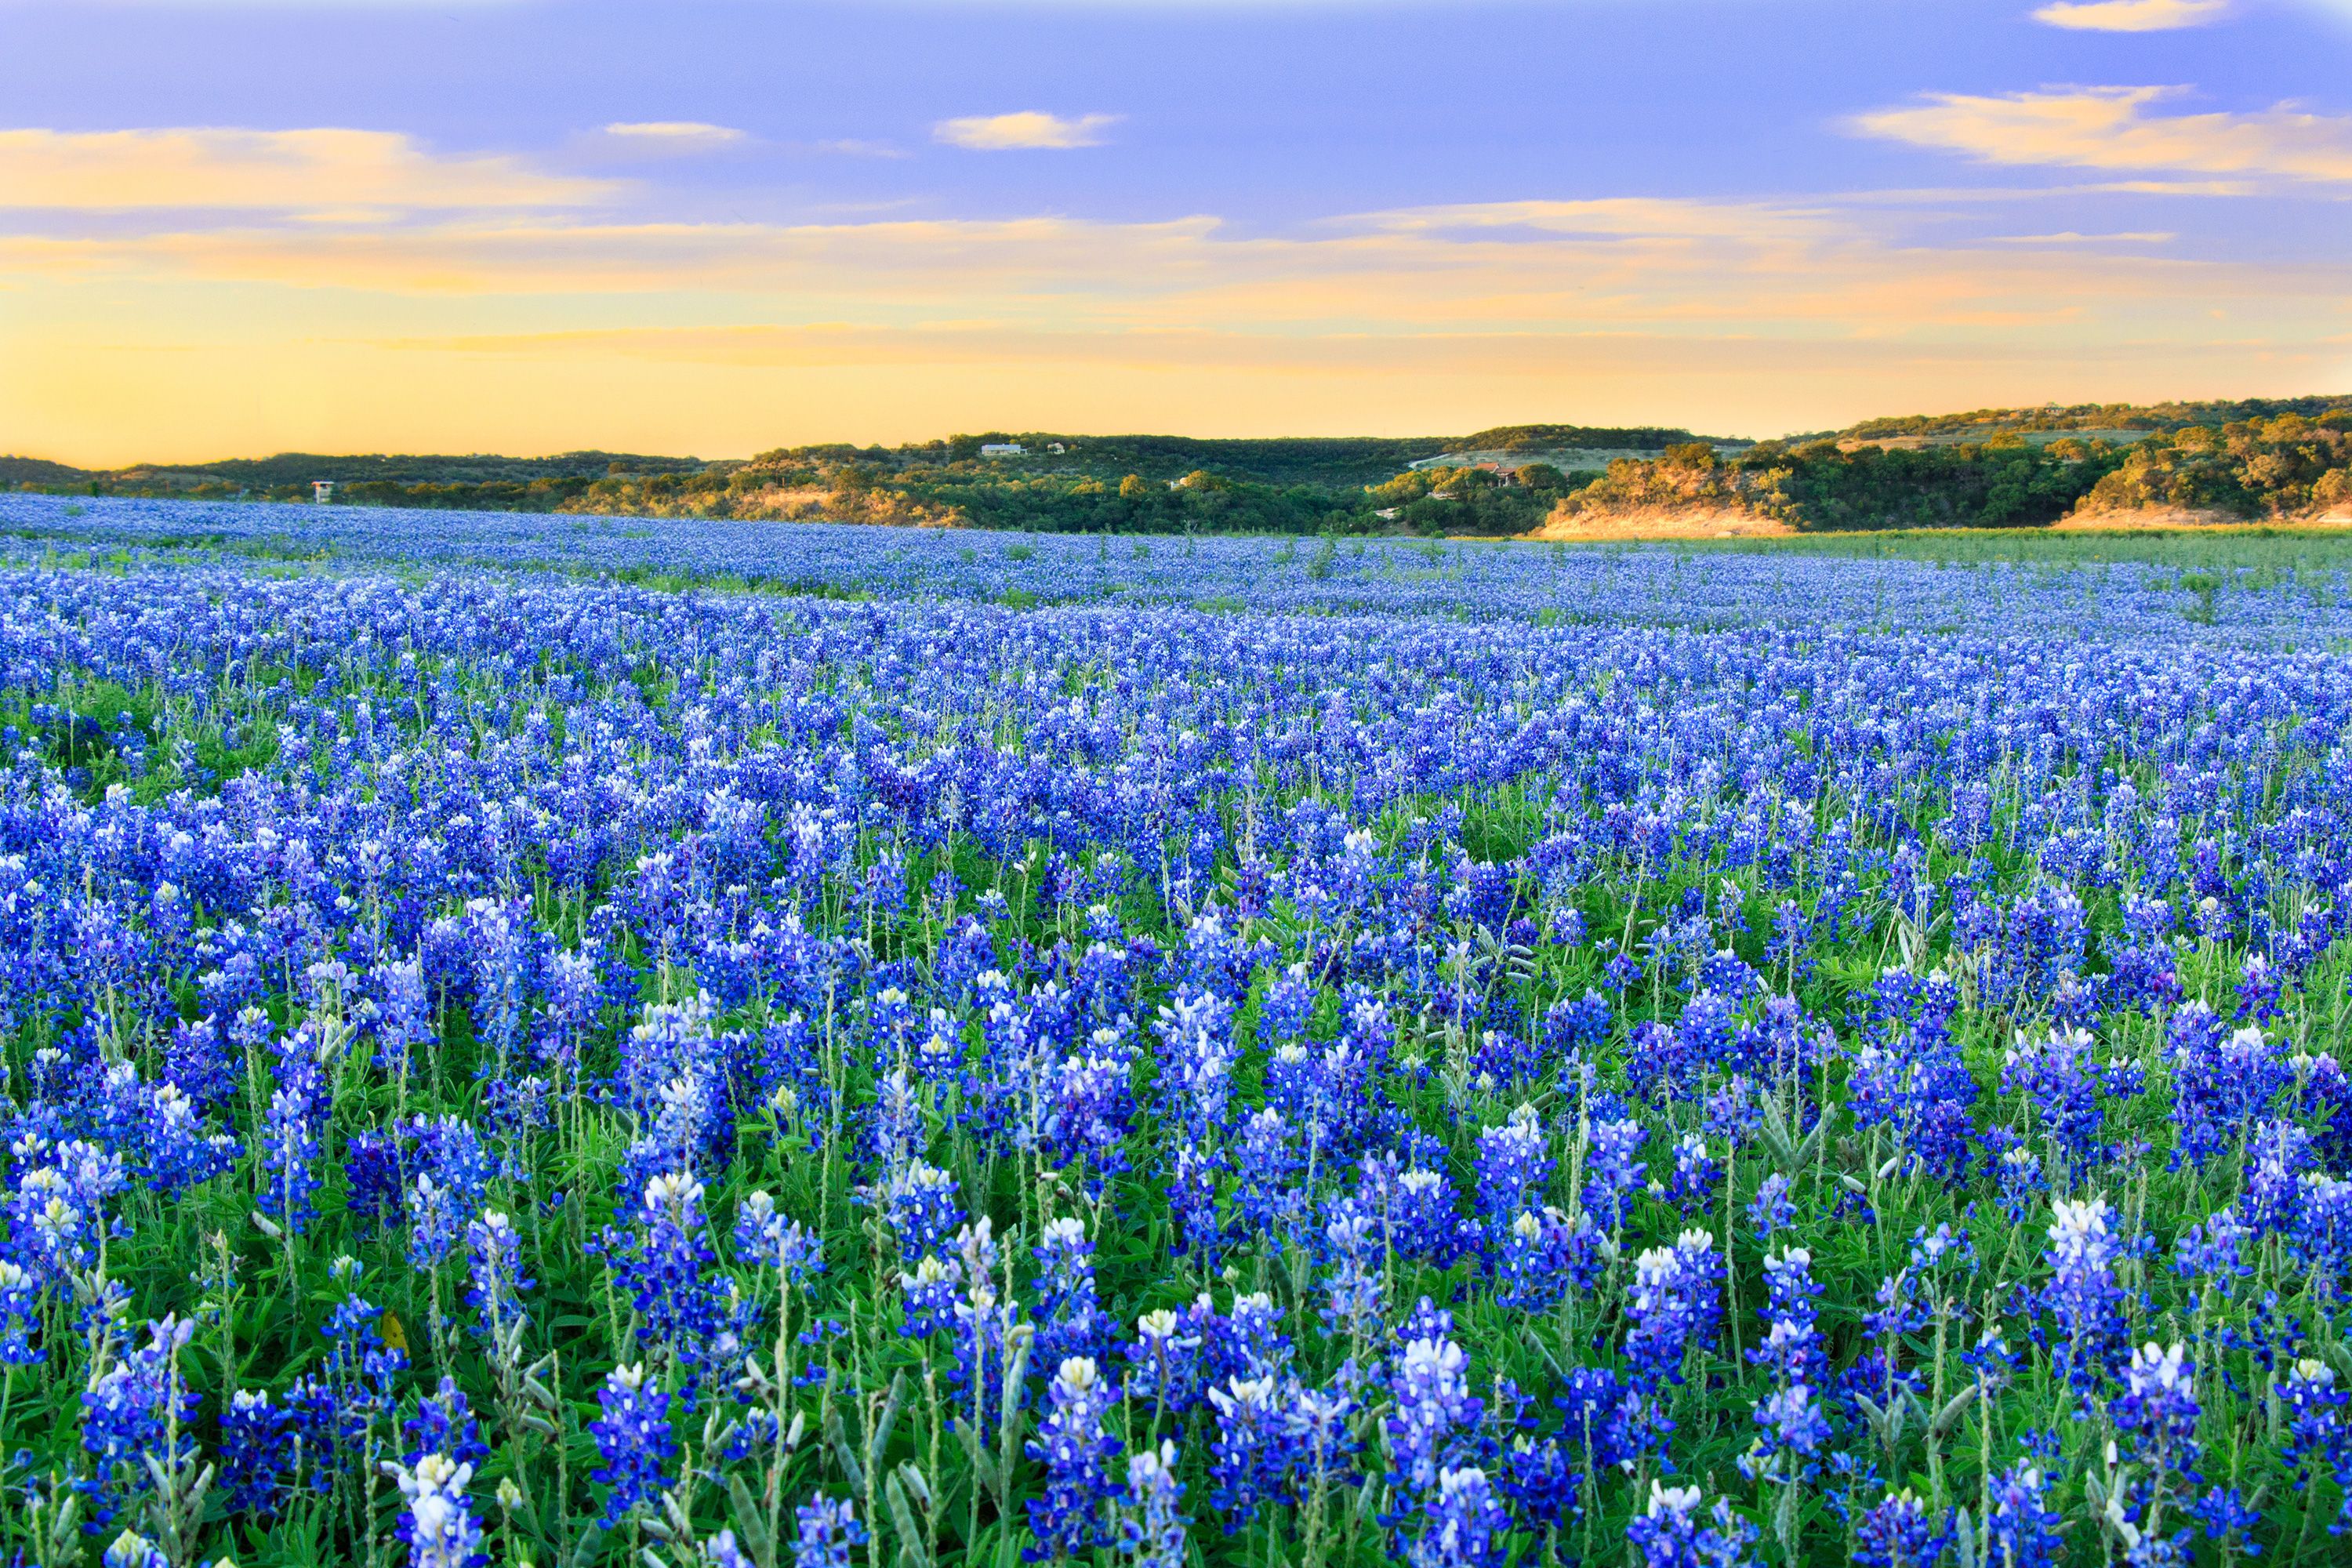 Where to See Spring Flowers in the United States